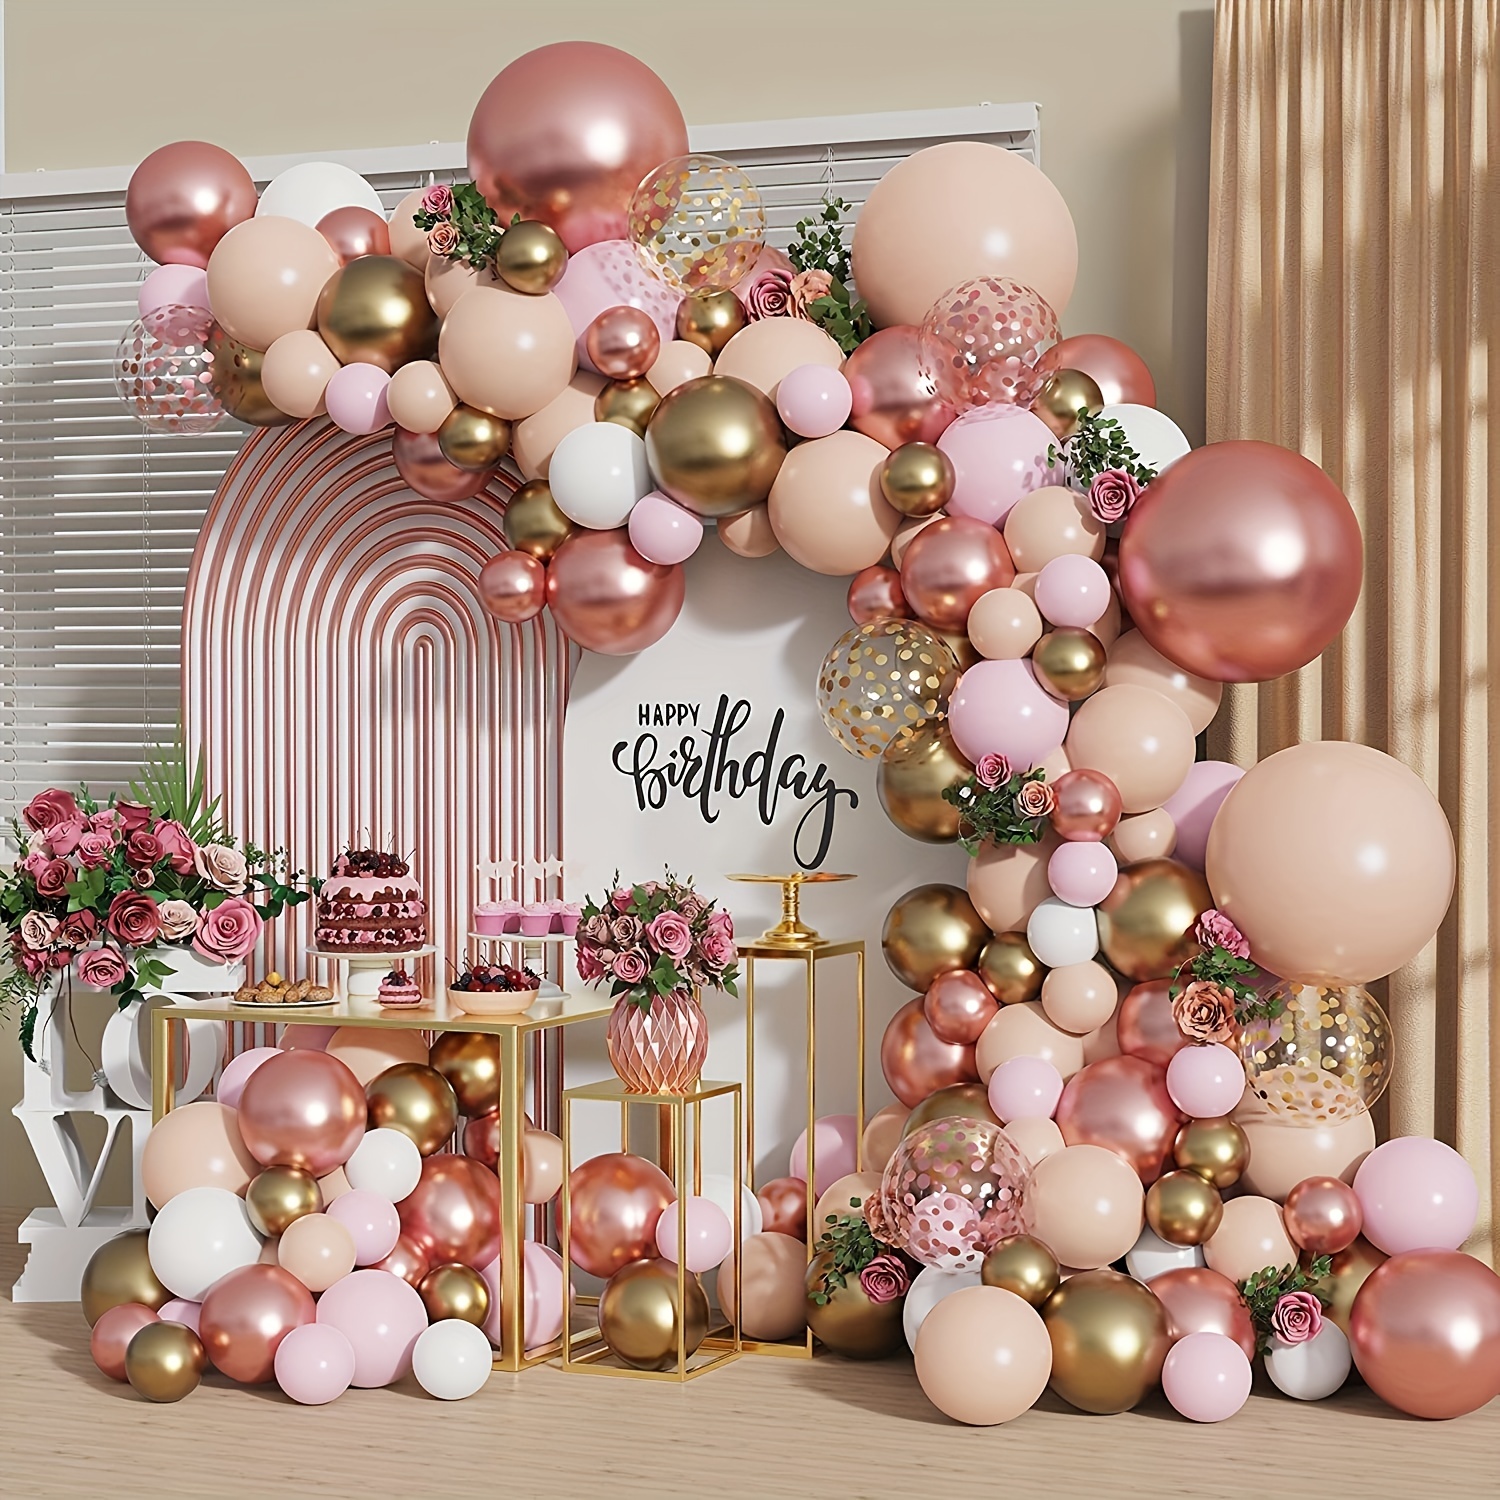  51 Pcs Gold and Black Party Decorations Kit Birthday Balloon  Boxes with Balloons and LED Light Strings Gold and Black Birthday Backdrop  Photo Props for Men Women Birthday Party Supply Balloon